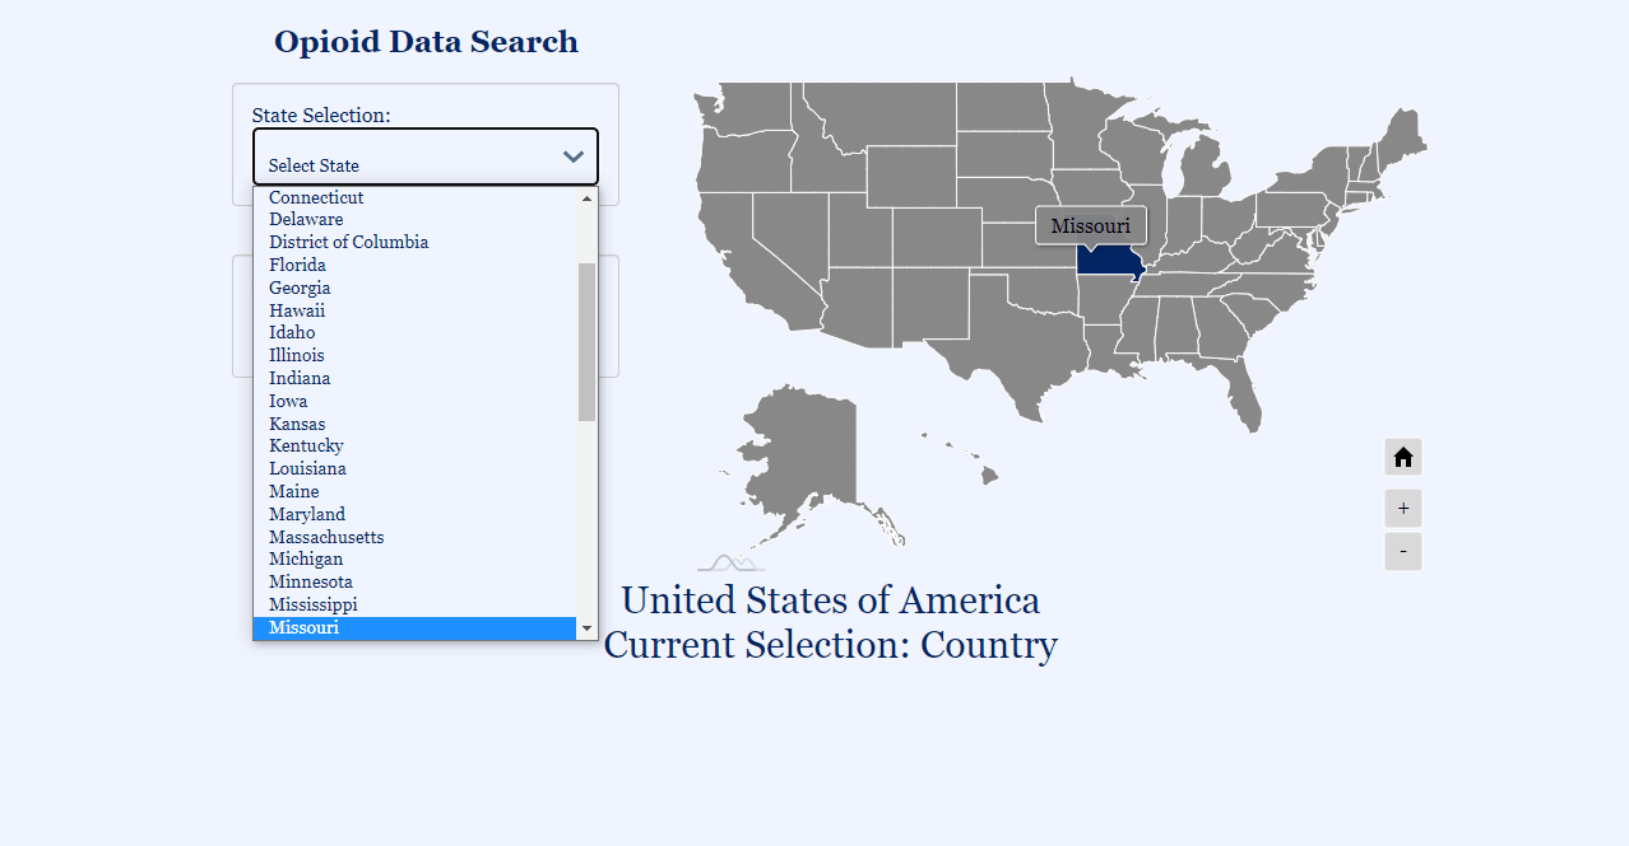 A screenshot shows the selection of a state on our interactive opioid data visualization. It shows a map of the United States with a state highlighted, and a dropdown menu to match.